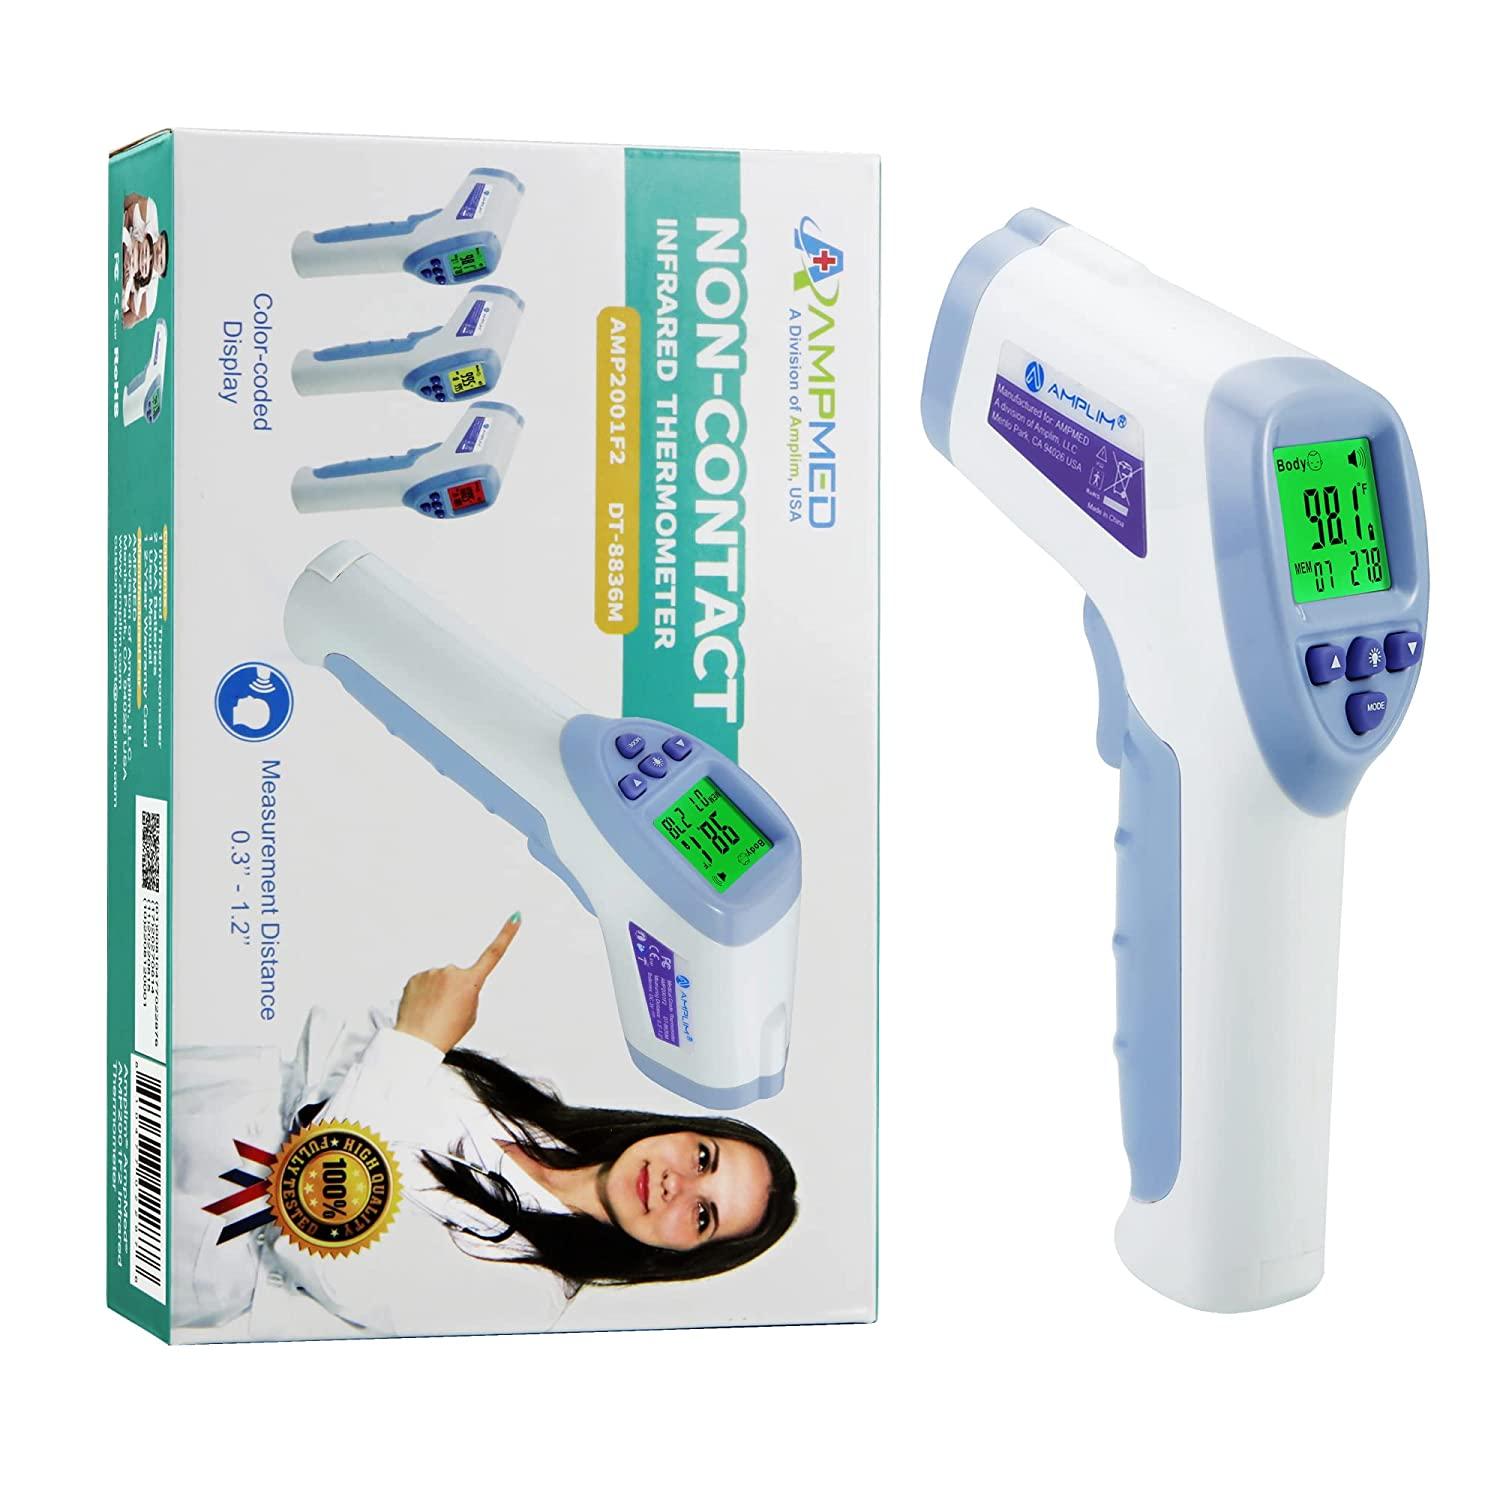 Digital Infrared Thermometer Non-contact Forehead Body Thermometer